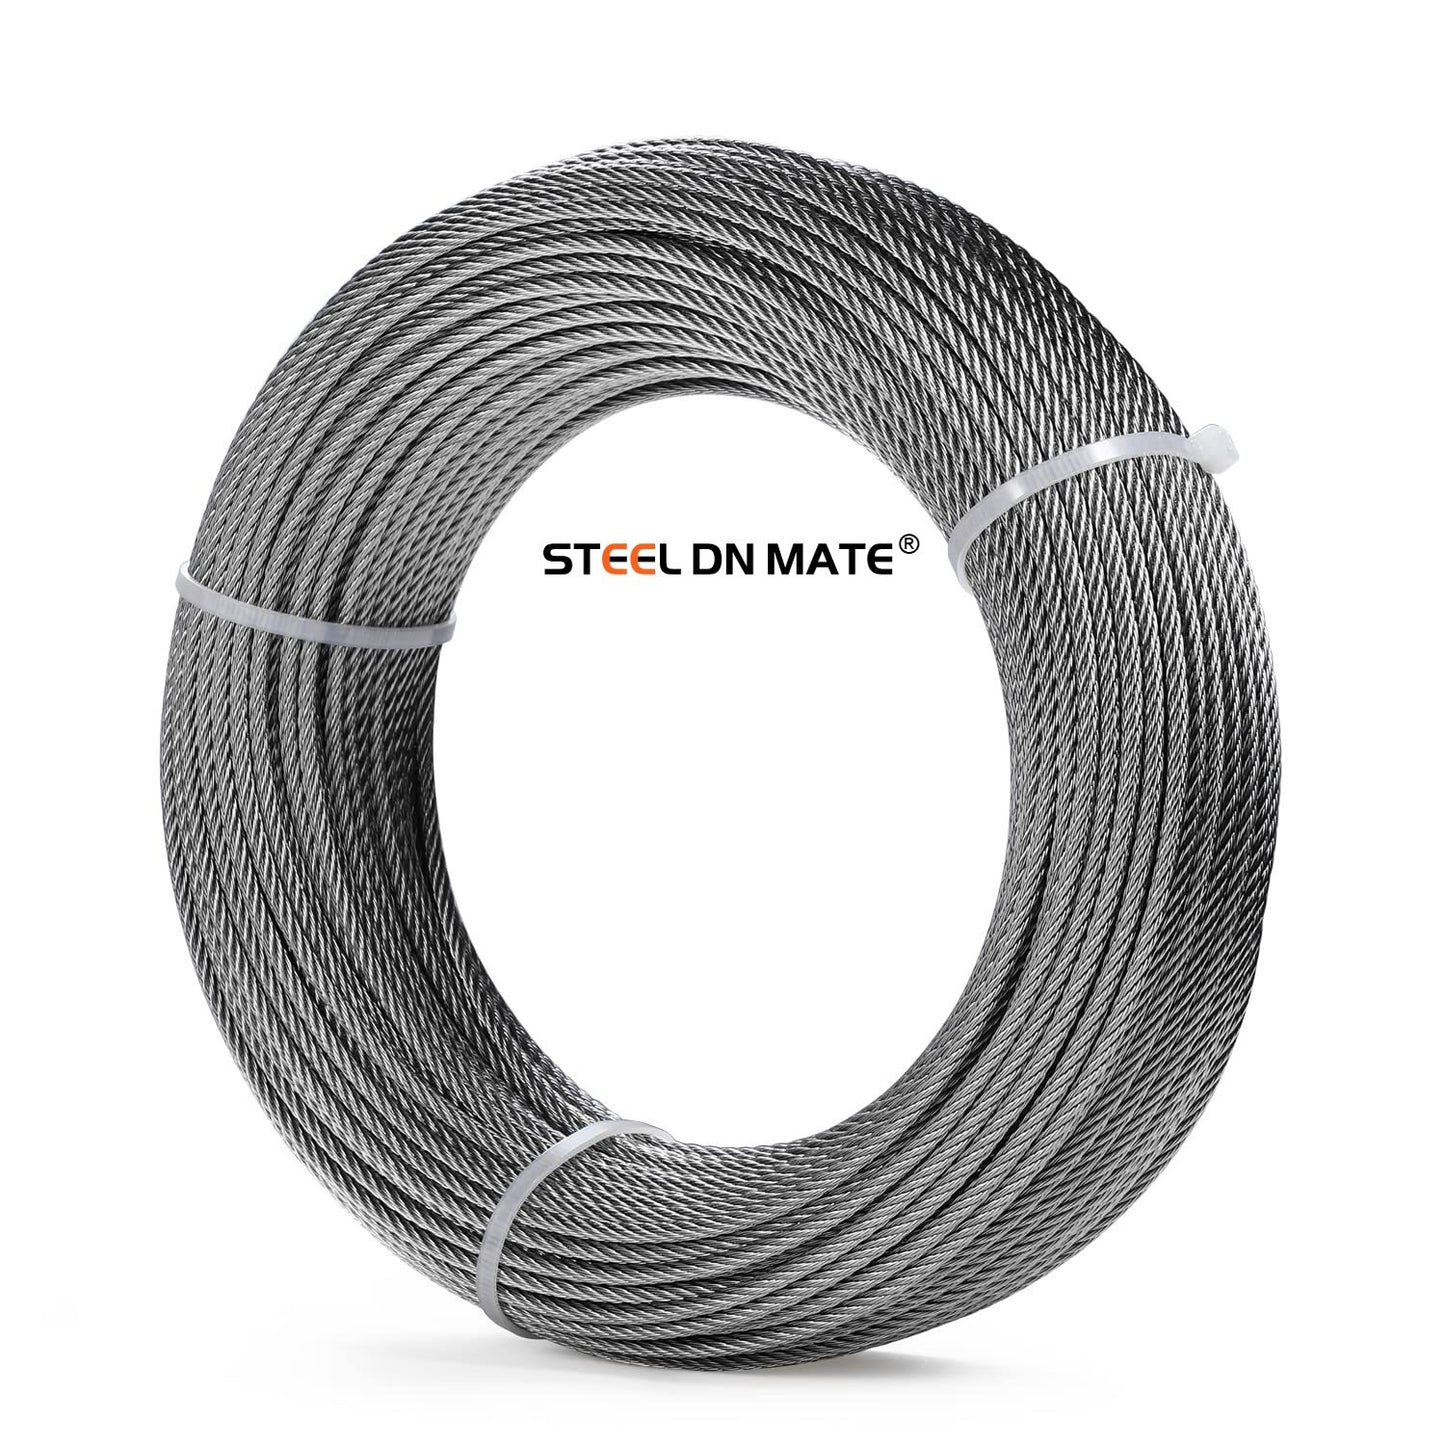 Steel DN Mate1/8 Stainless Steel Cable for Steel Cable Railing Kit, T316 Stainless Steel Wire, 1800 lb Breaking Strength, 7x7 Strands Construction Cable Railing System, Marine Grade Wire